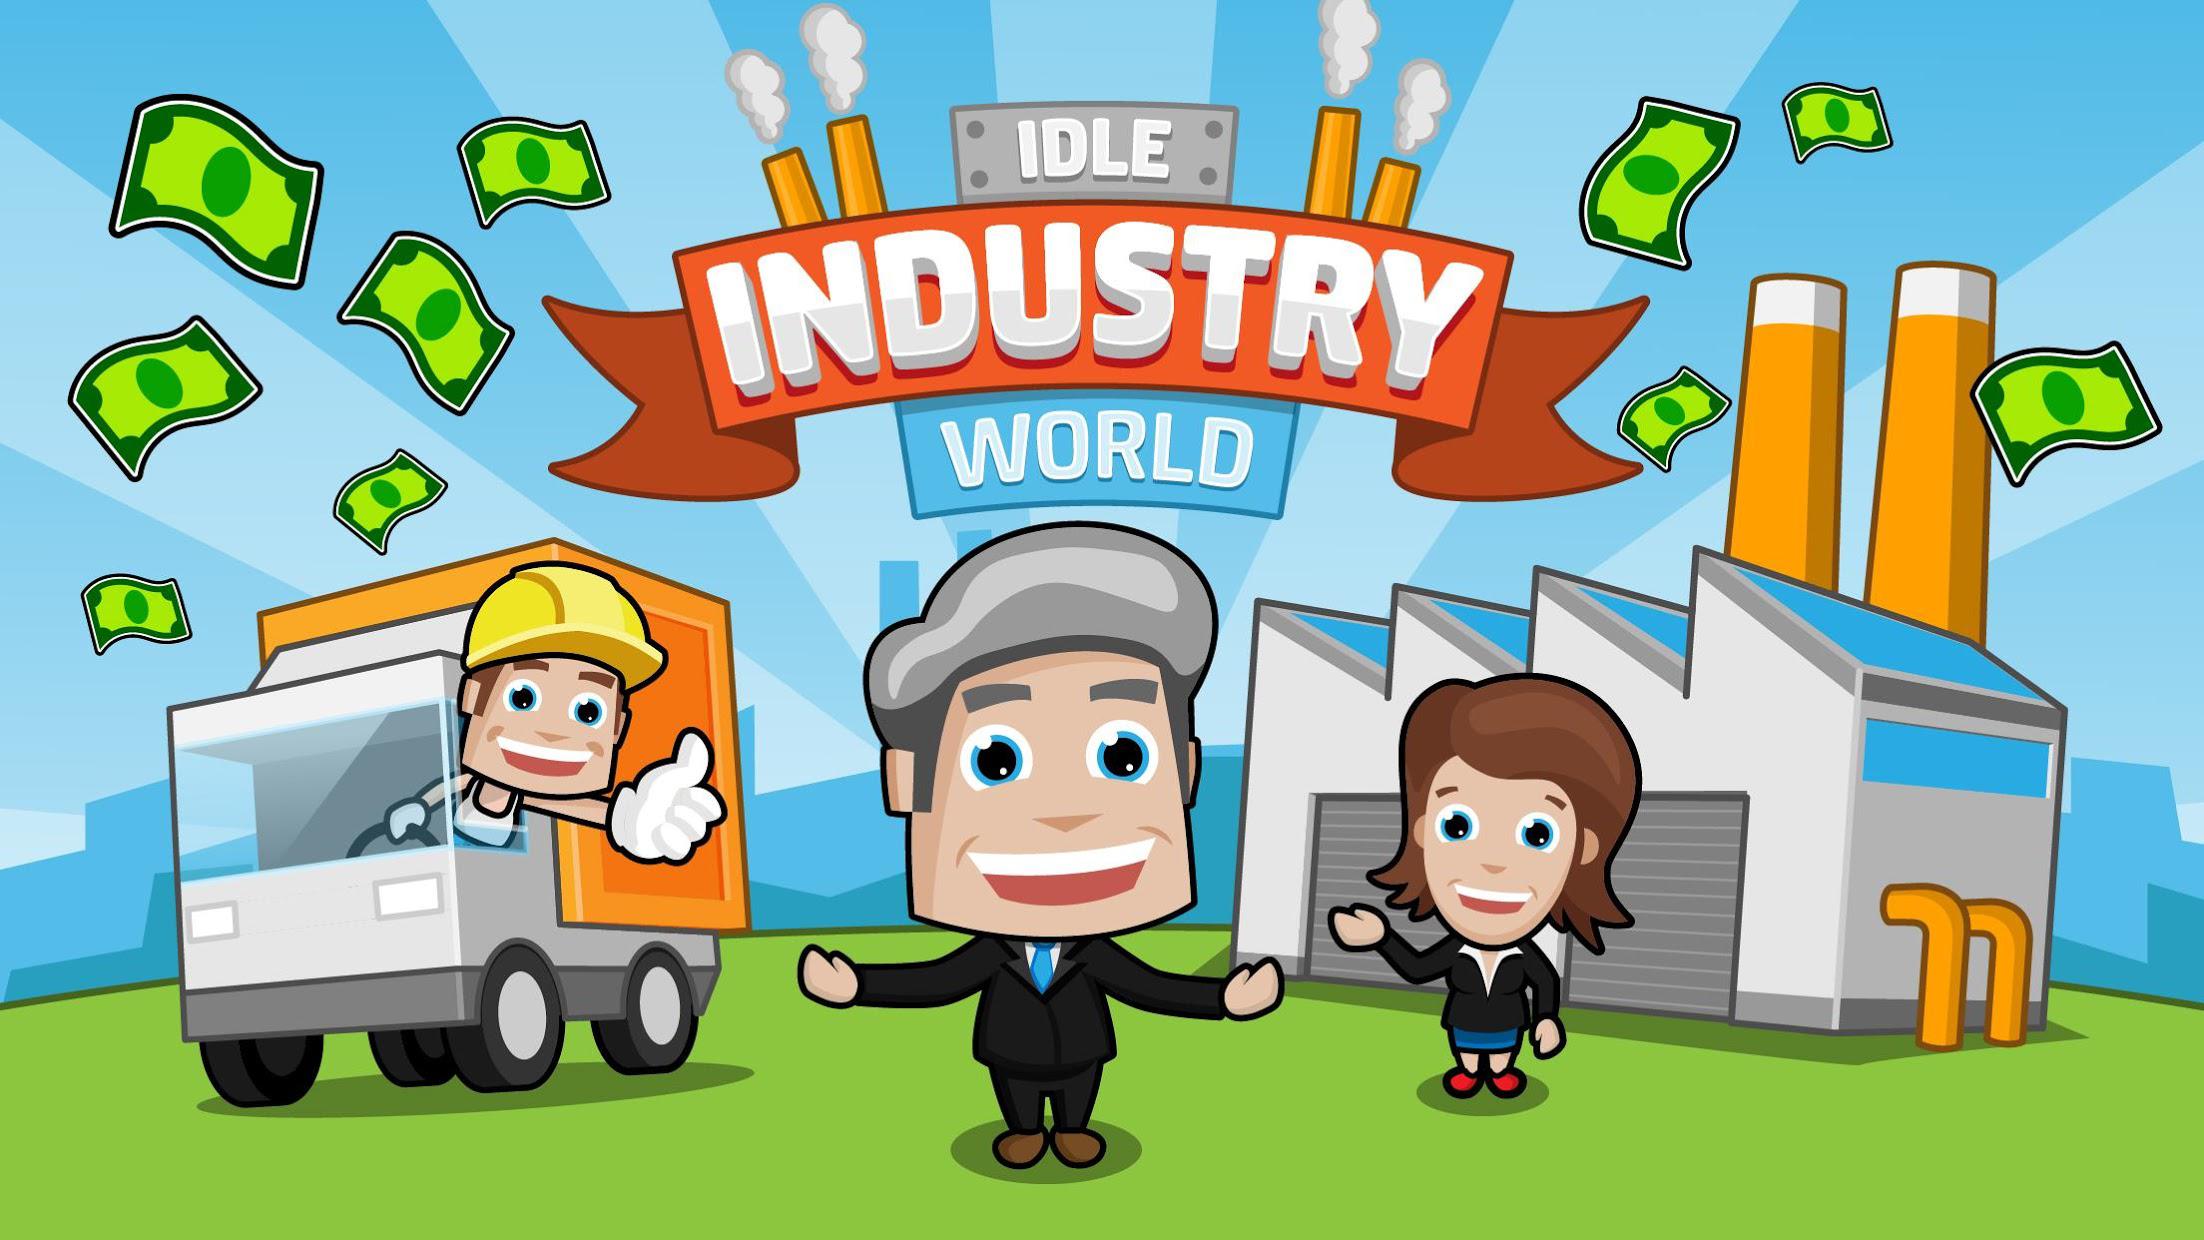 Idle Industry World